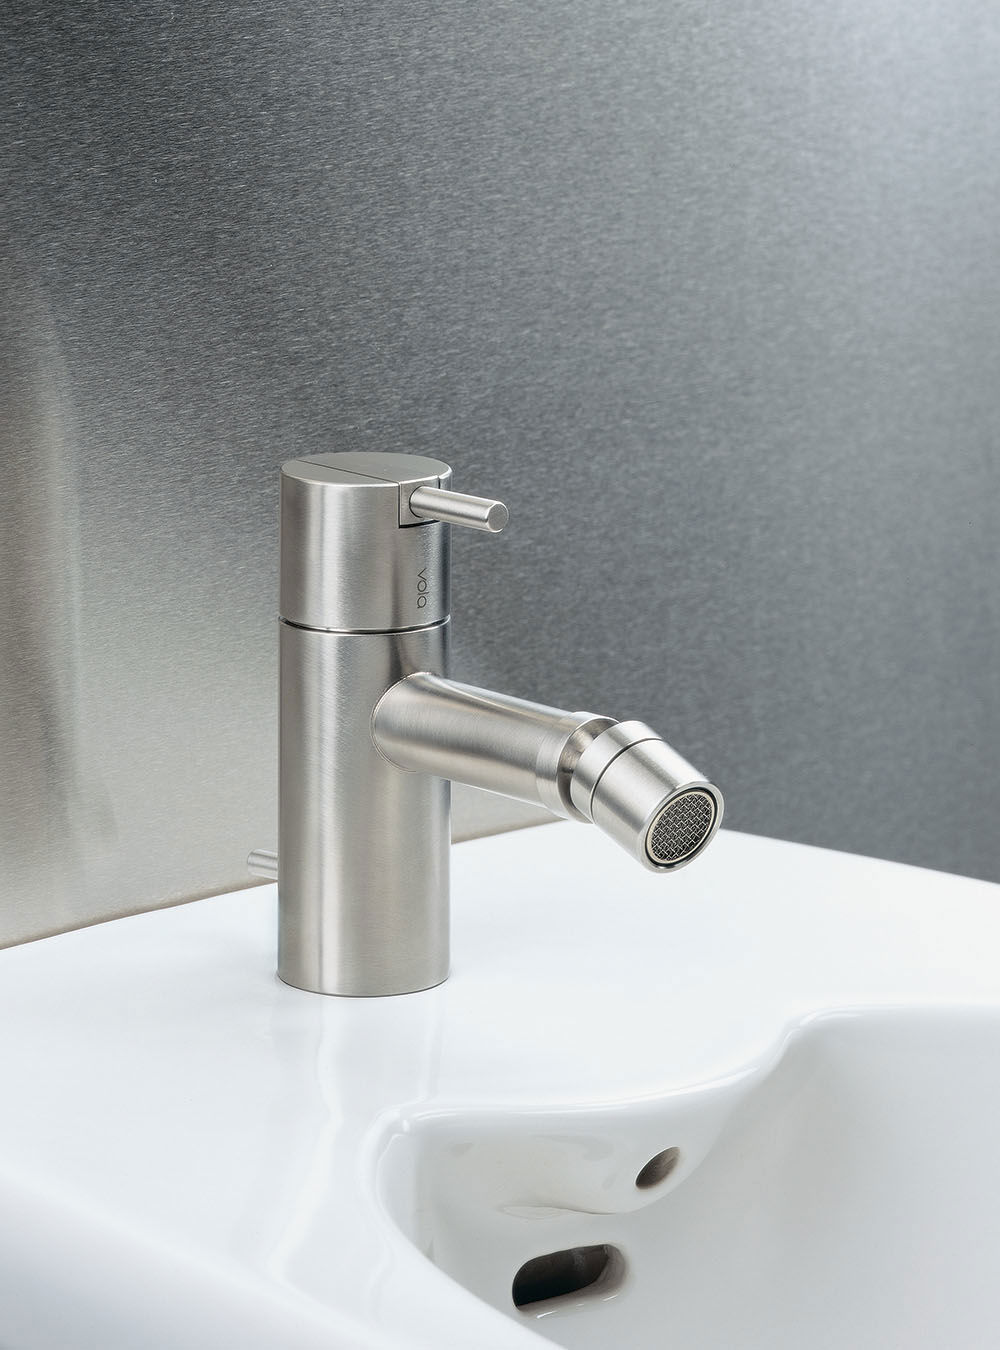 HV4: One-handle bidet mixer with ceramic disc technology fixed spout with adjustable nozzle, pop-up waste